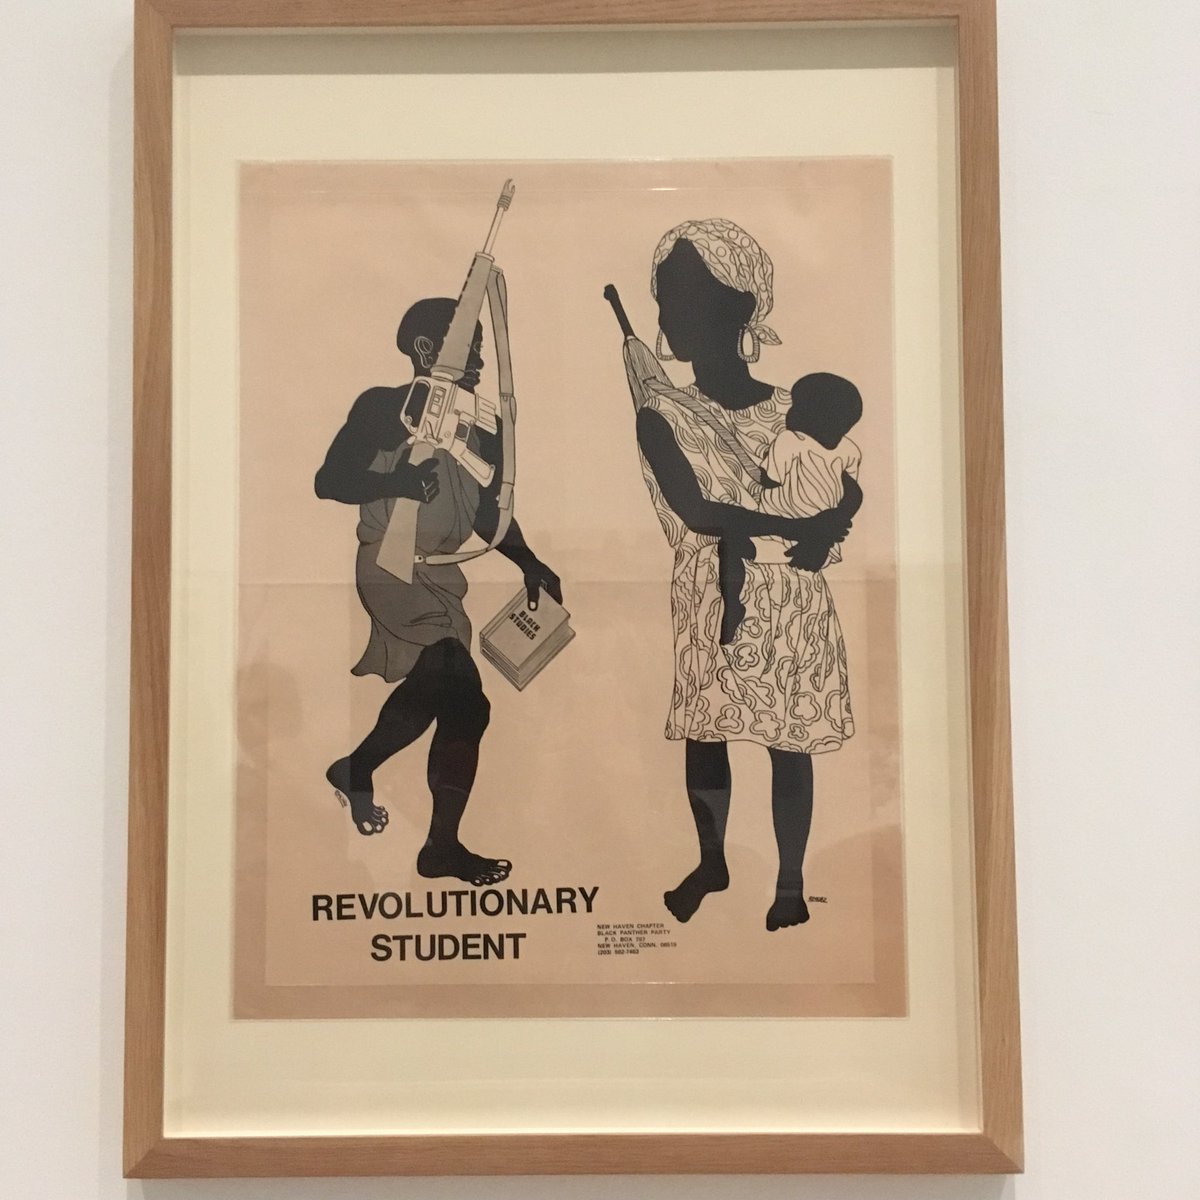 6. selections from the newspaper ‘The Black Panther’ and posters, c. 1970, Emory Douglas.